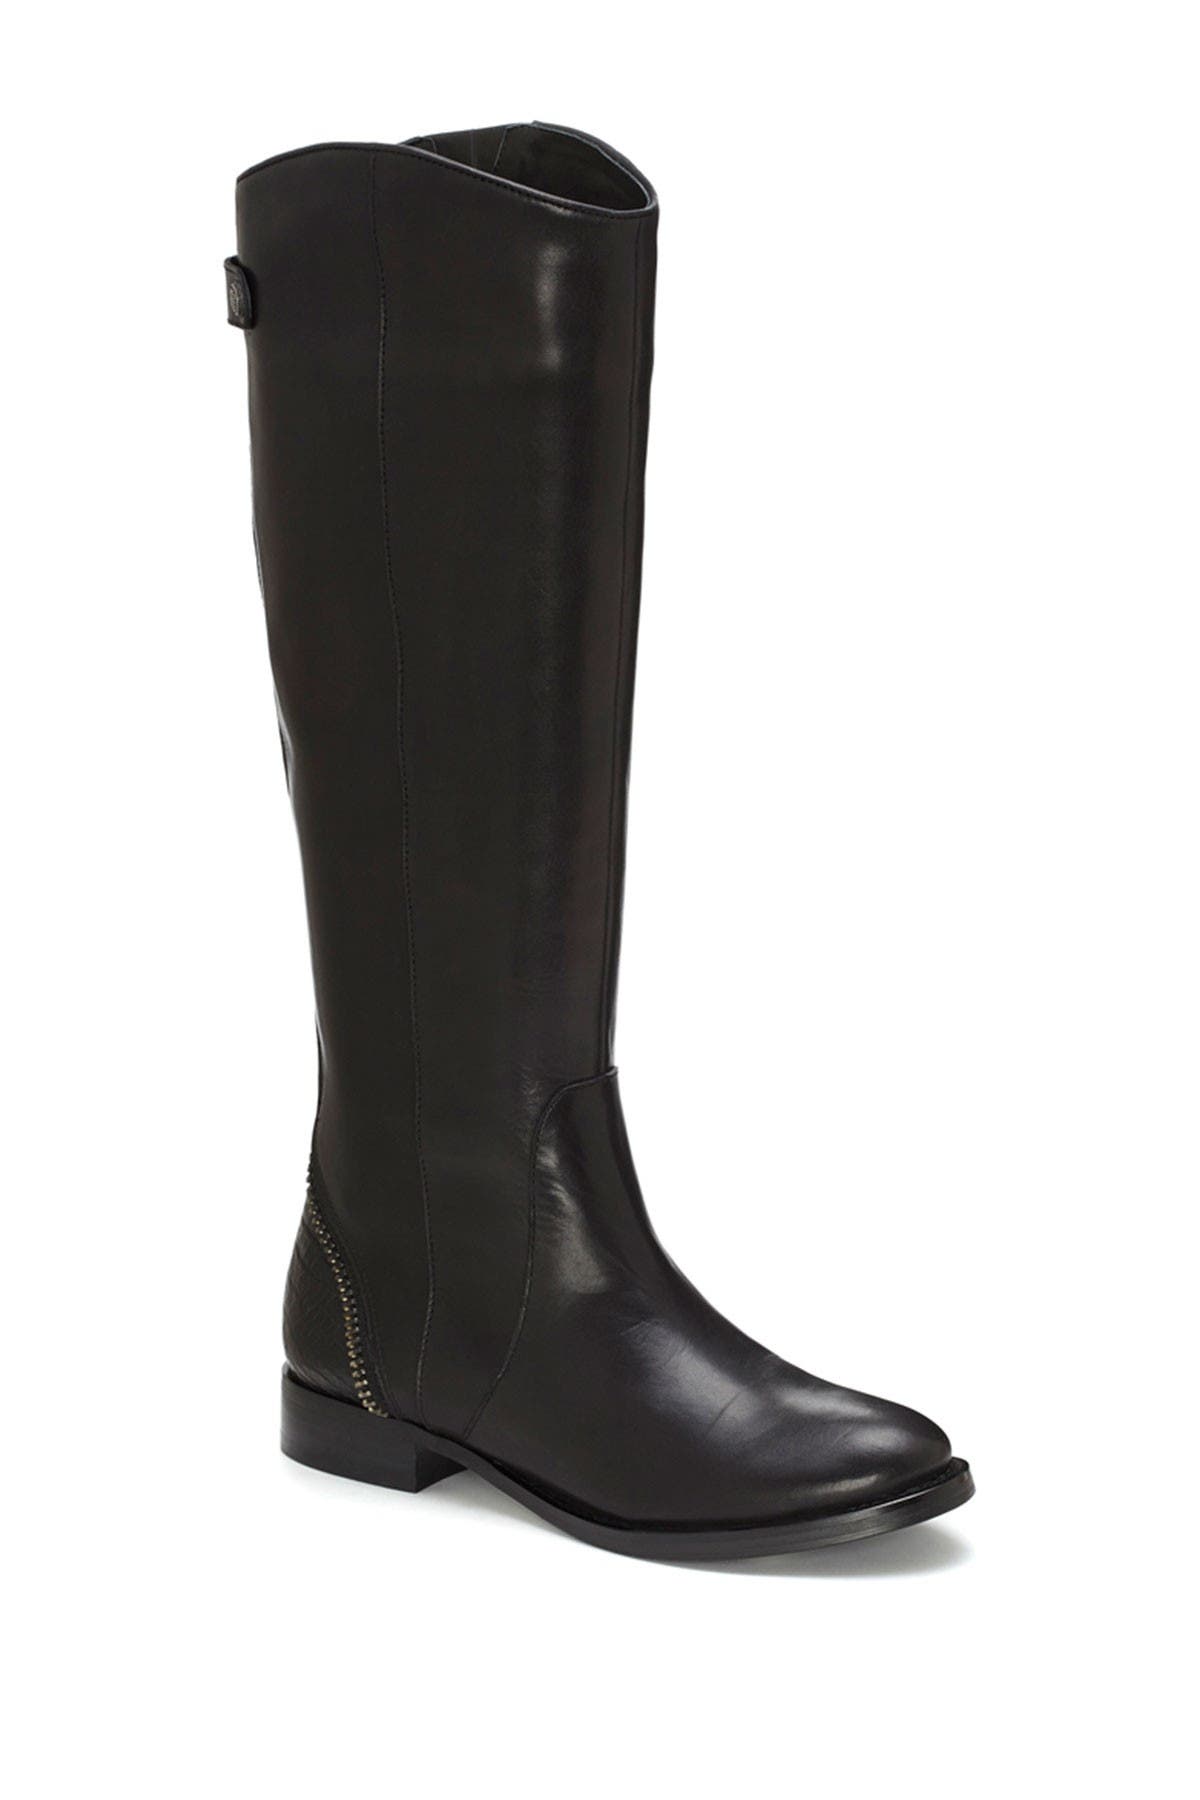 nordstrom tall black boots